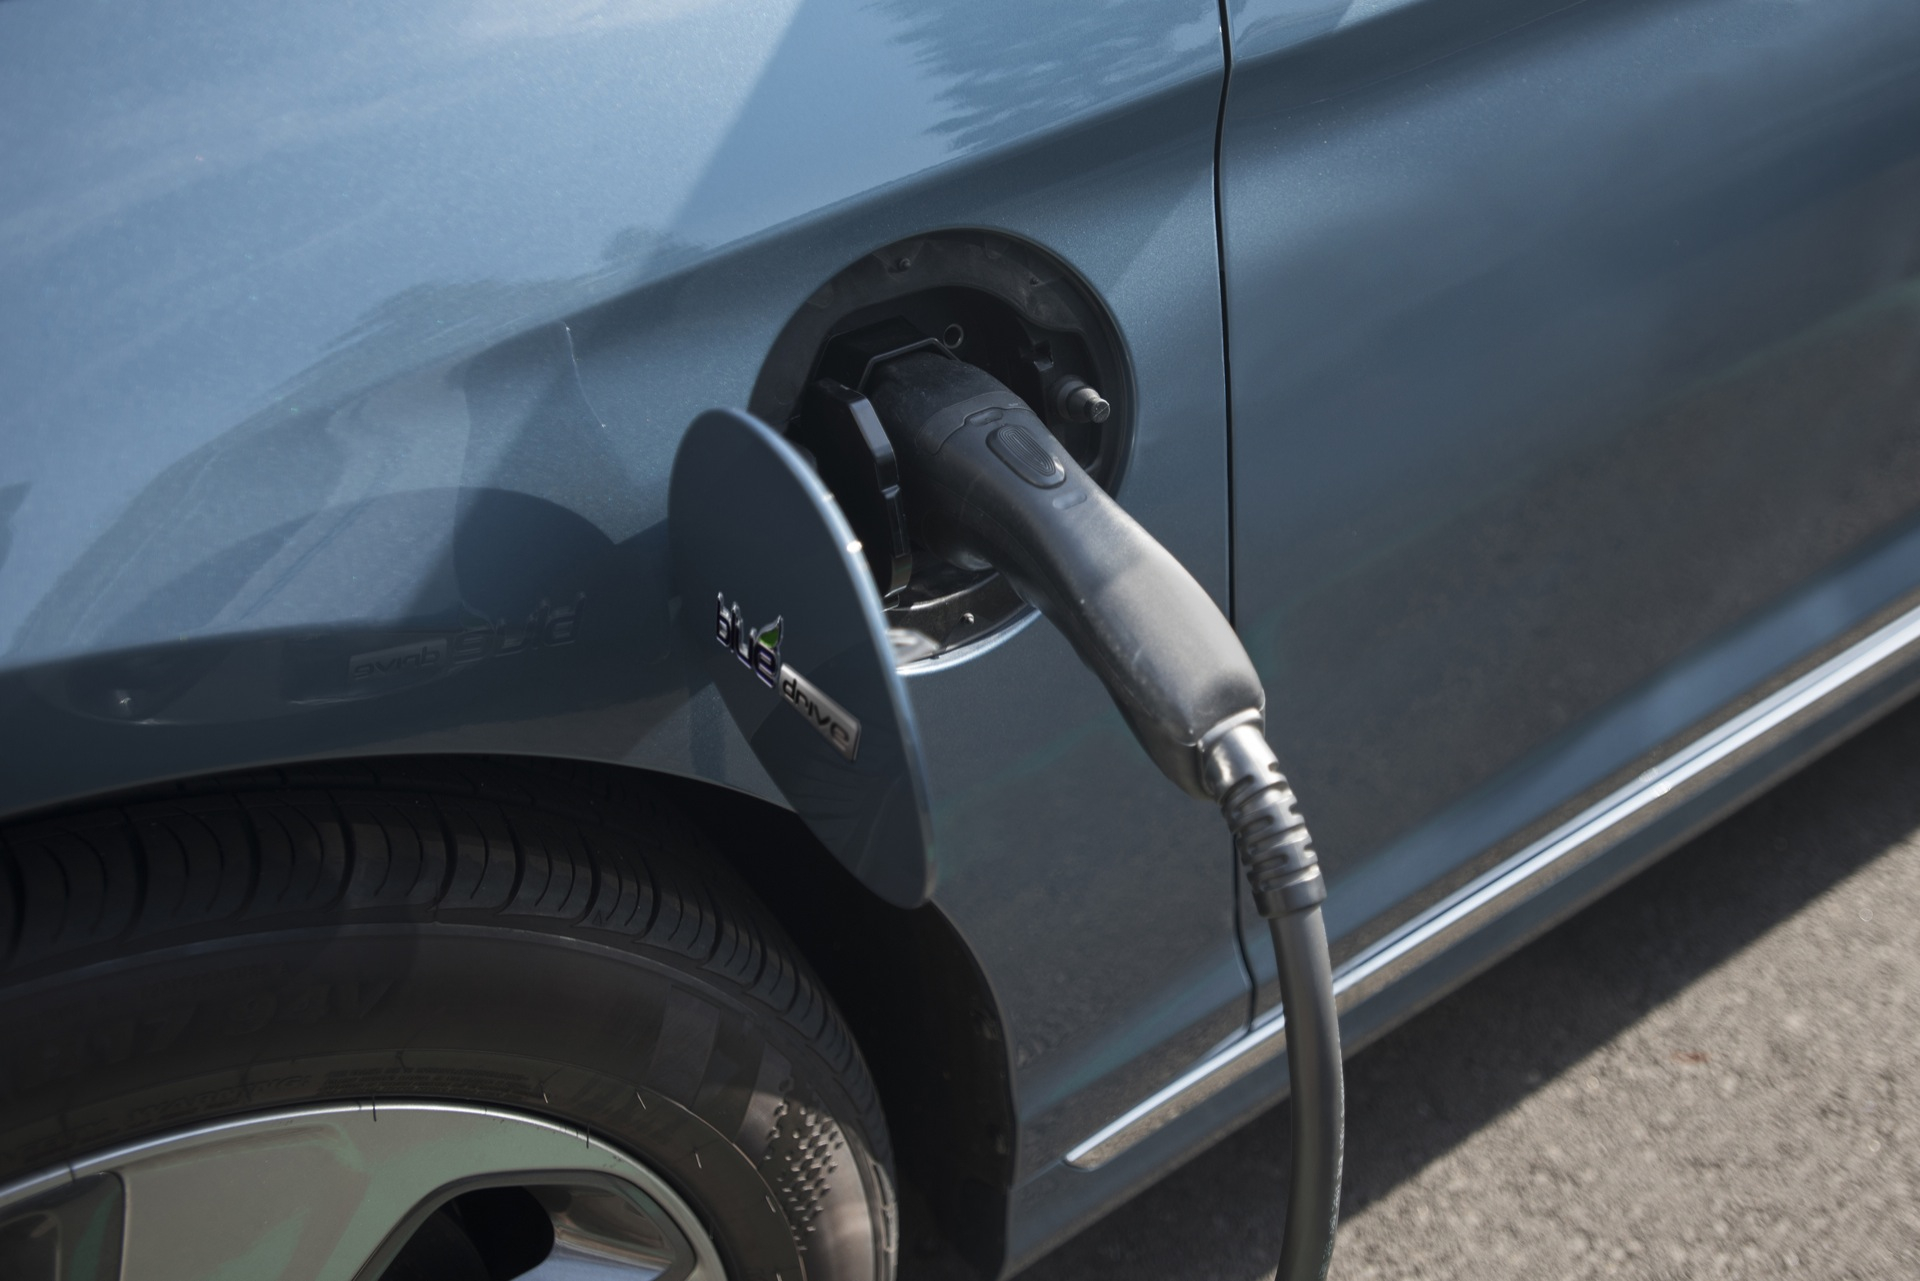 California Utility SCE Offers 450 Rebate For New And Used Electric Cars